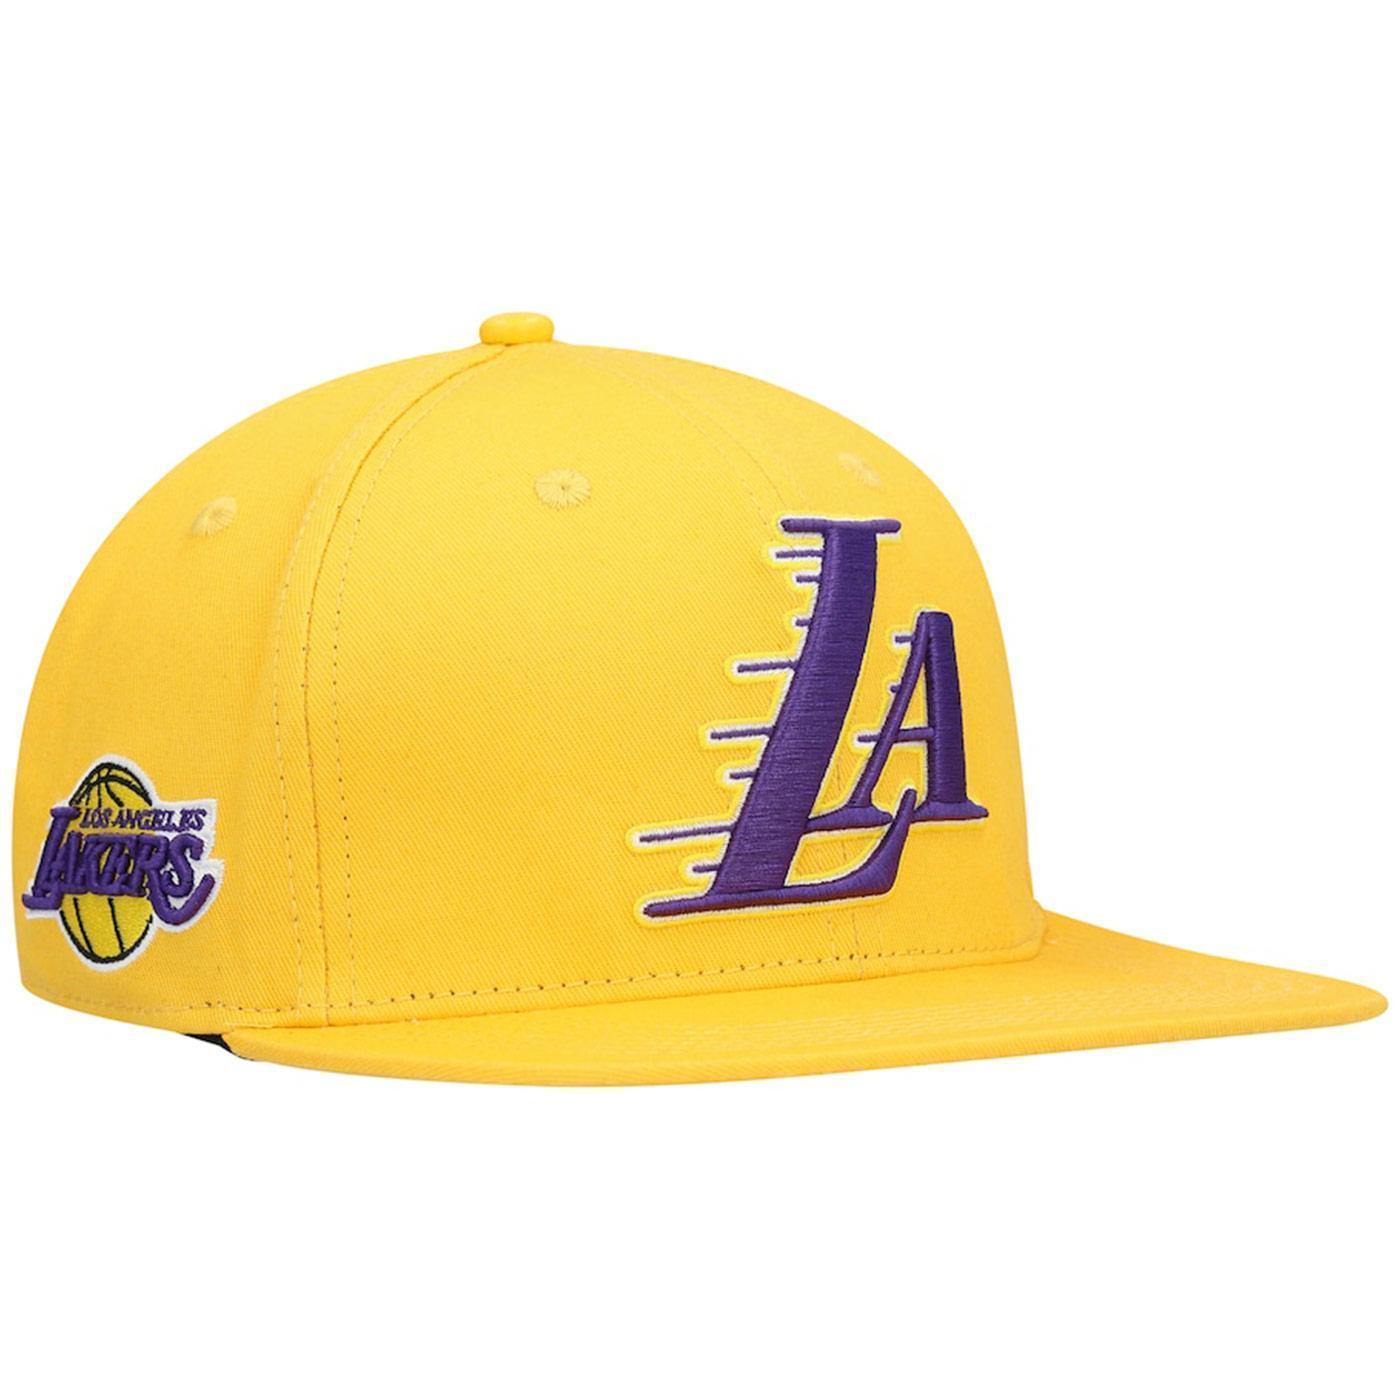 Make Los Angeles Great Again Dad Hats x Dodgers Lakers Colors Purple / Gold